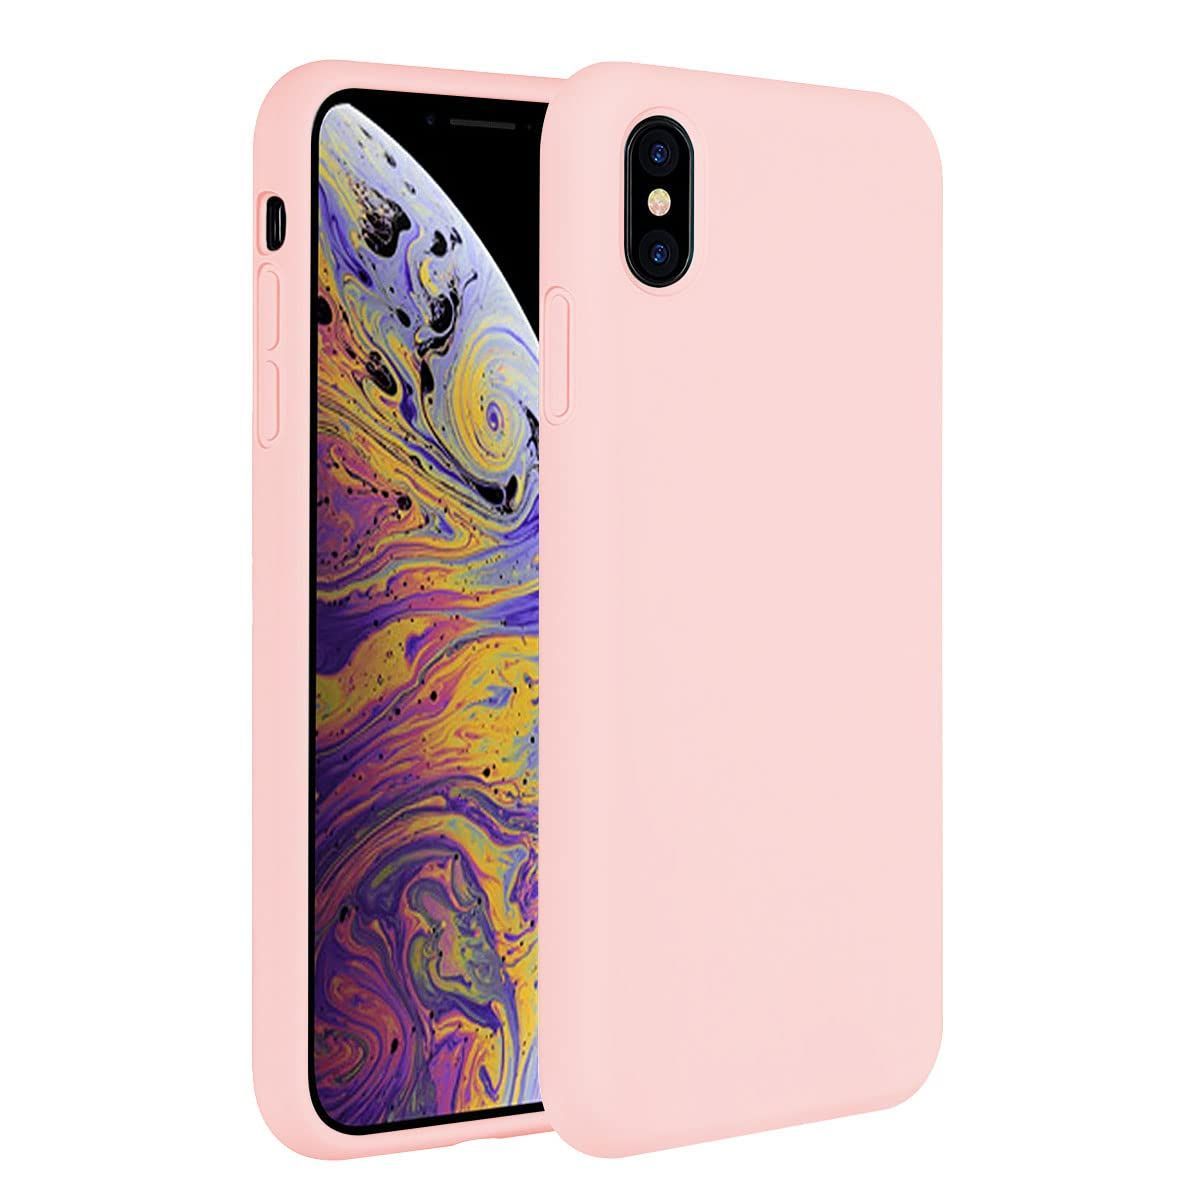 Apple Silicone Case for iPhone XS - Pink Sand 